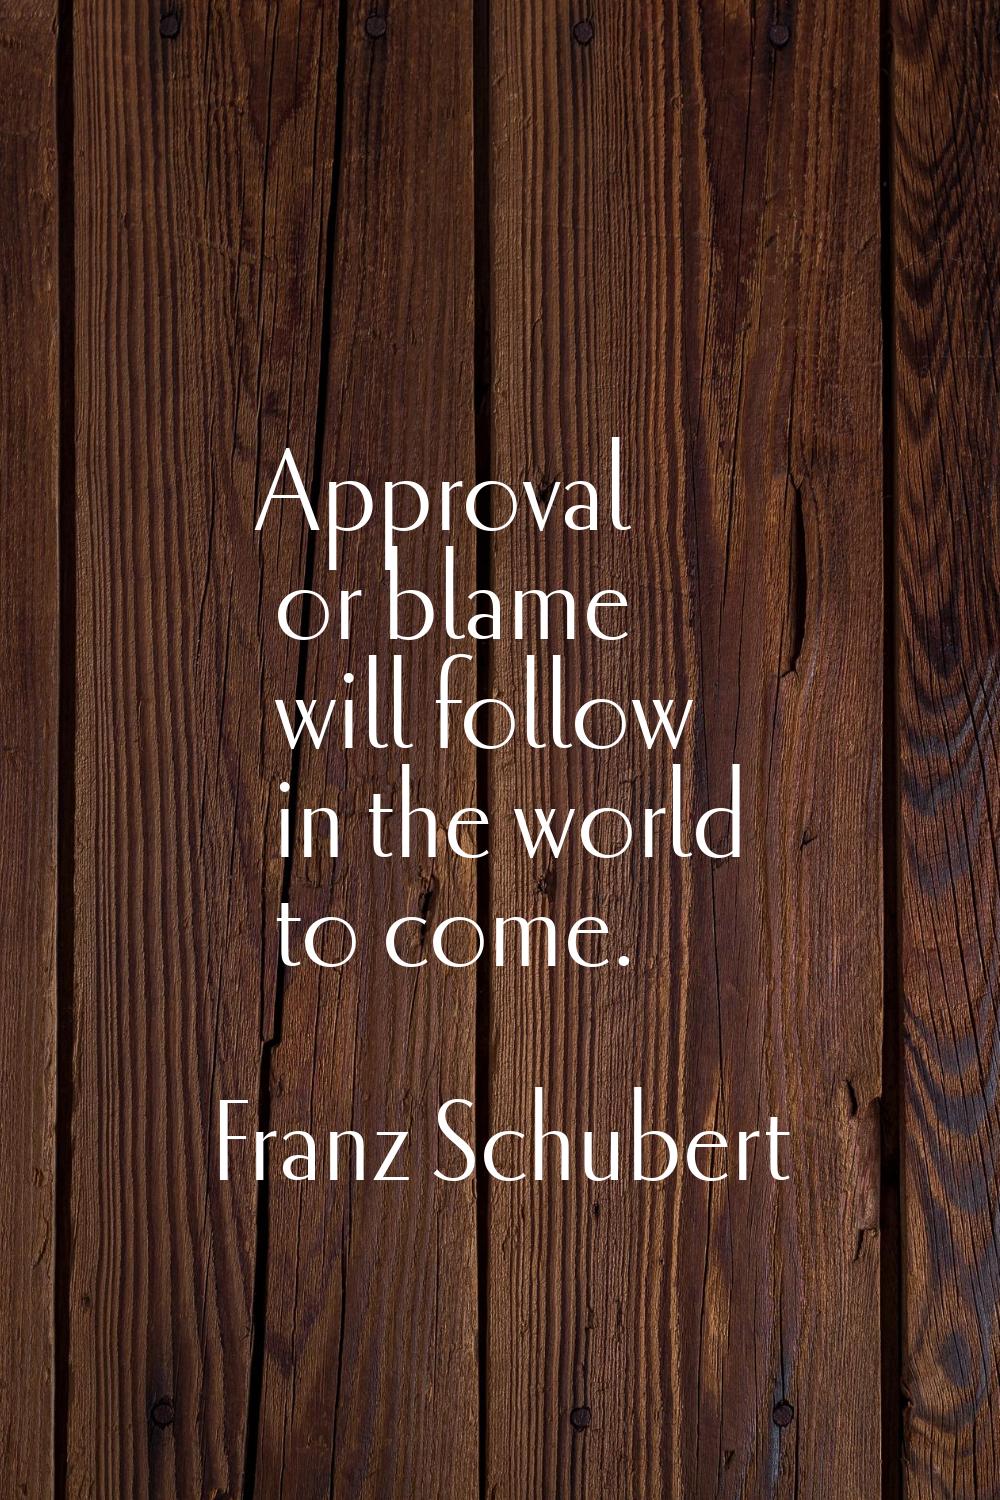 Approval or blame will follow in the world to come.